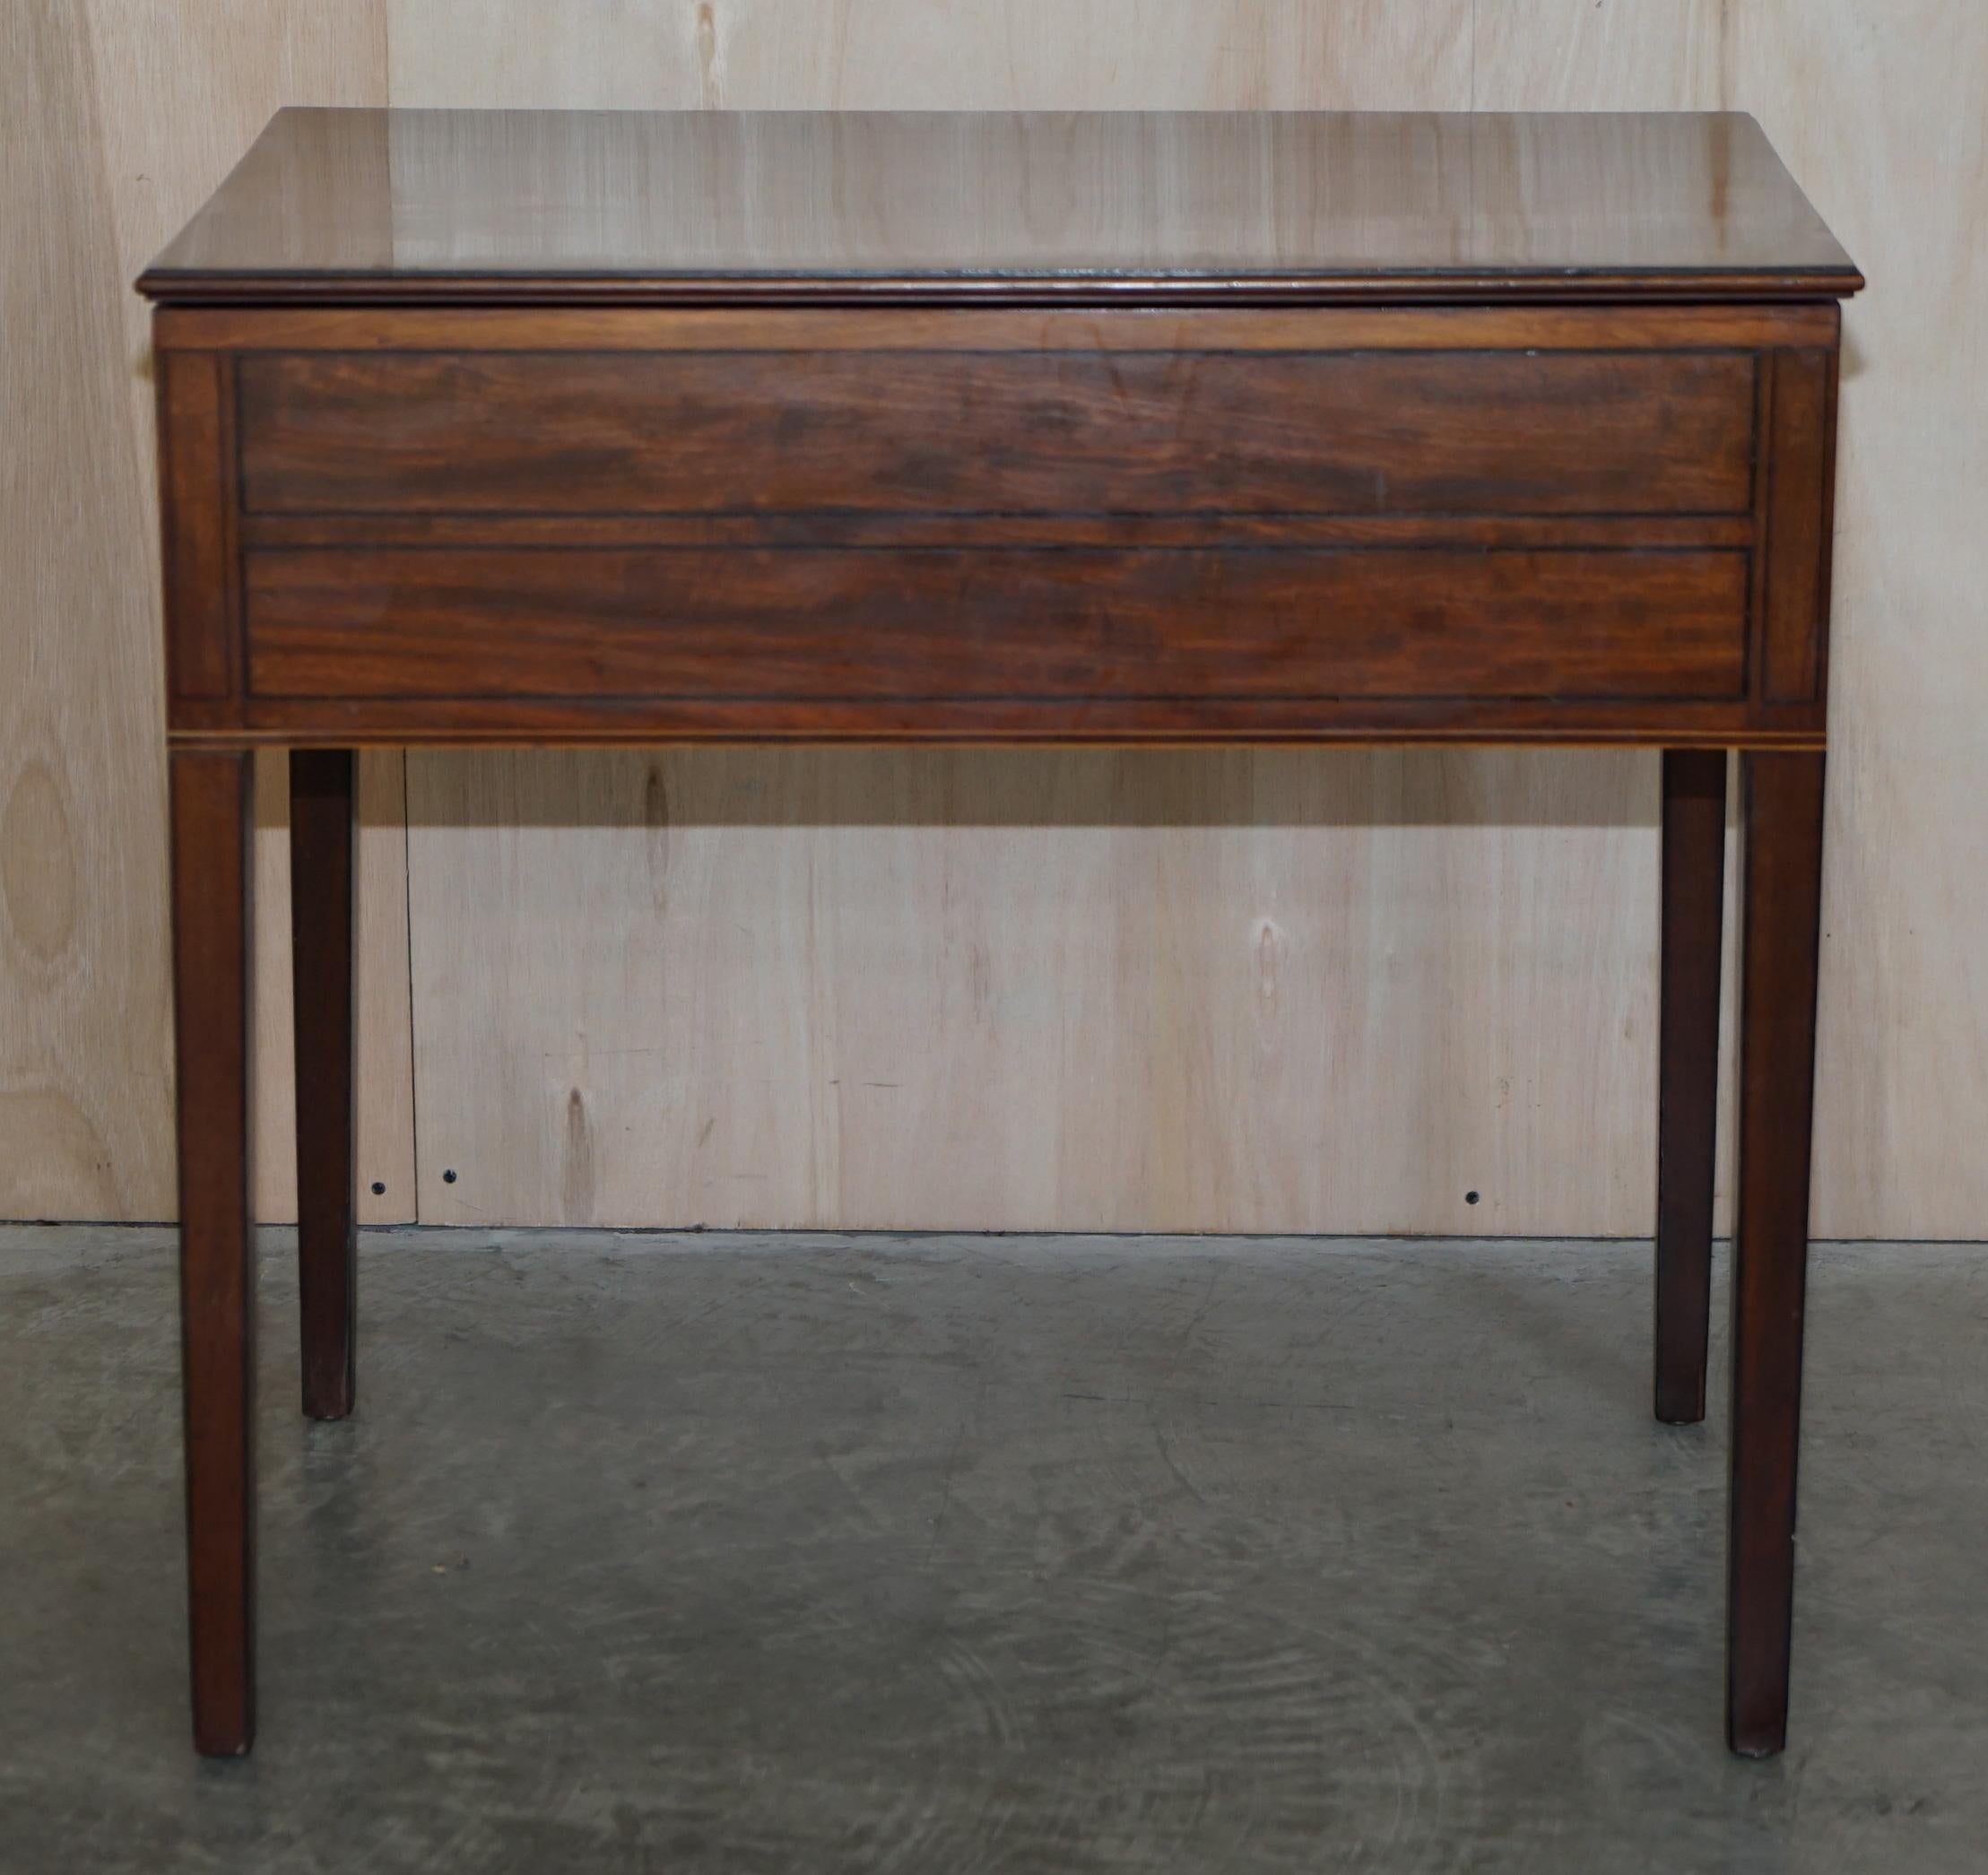 Very Fine circa 1780 Georgian Mahogany Reading Table with Candle Slips & Slope For Sale 4